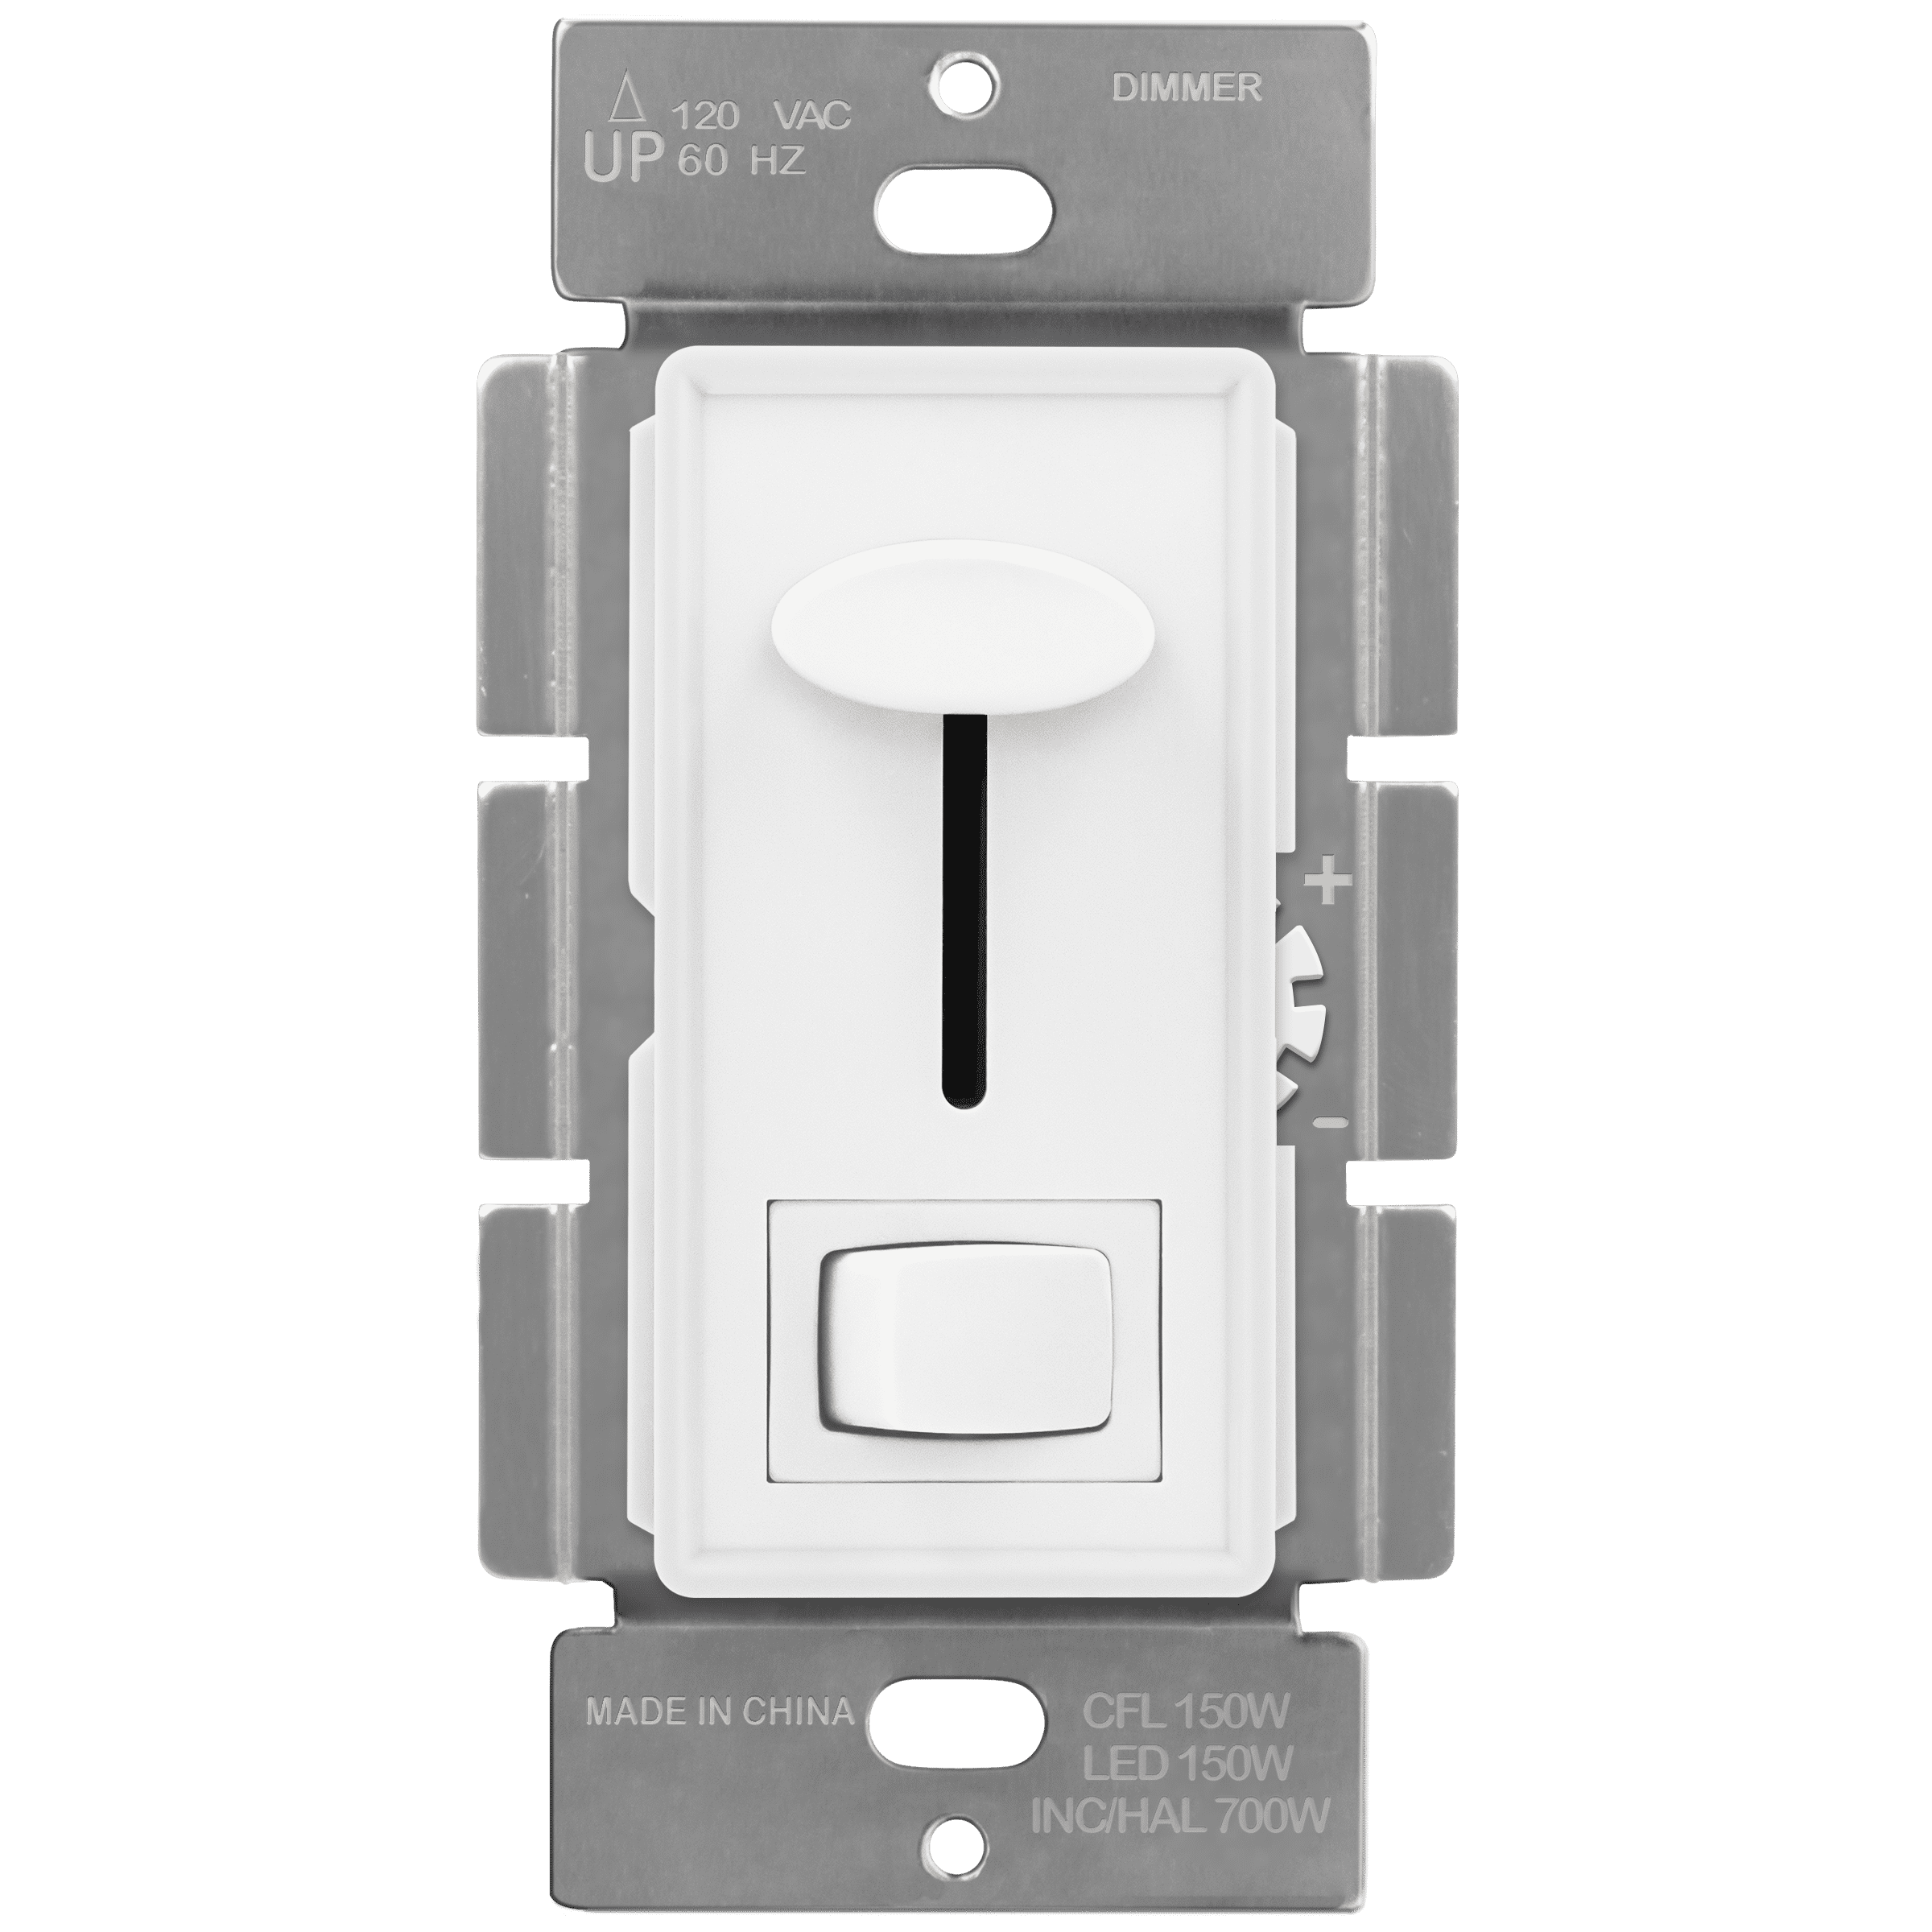 Century 600W Incandescent Wall 150W CFL Light Dimmer Switch WHITE Slide Control 